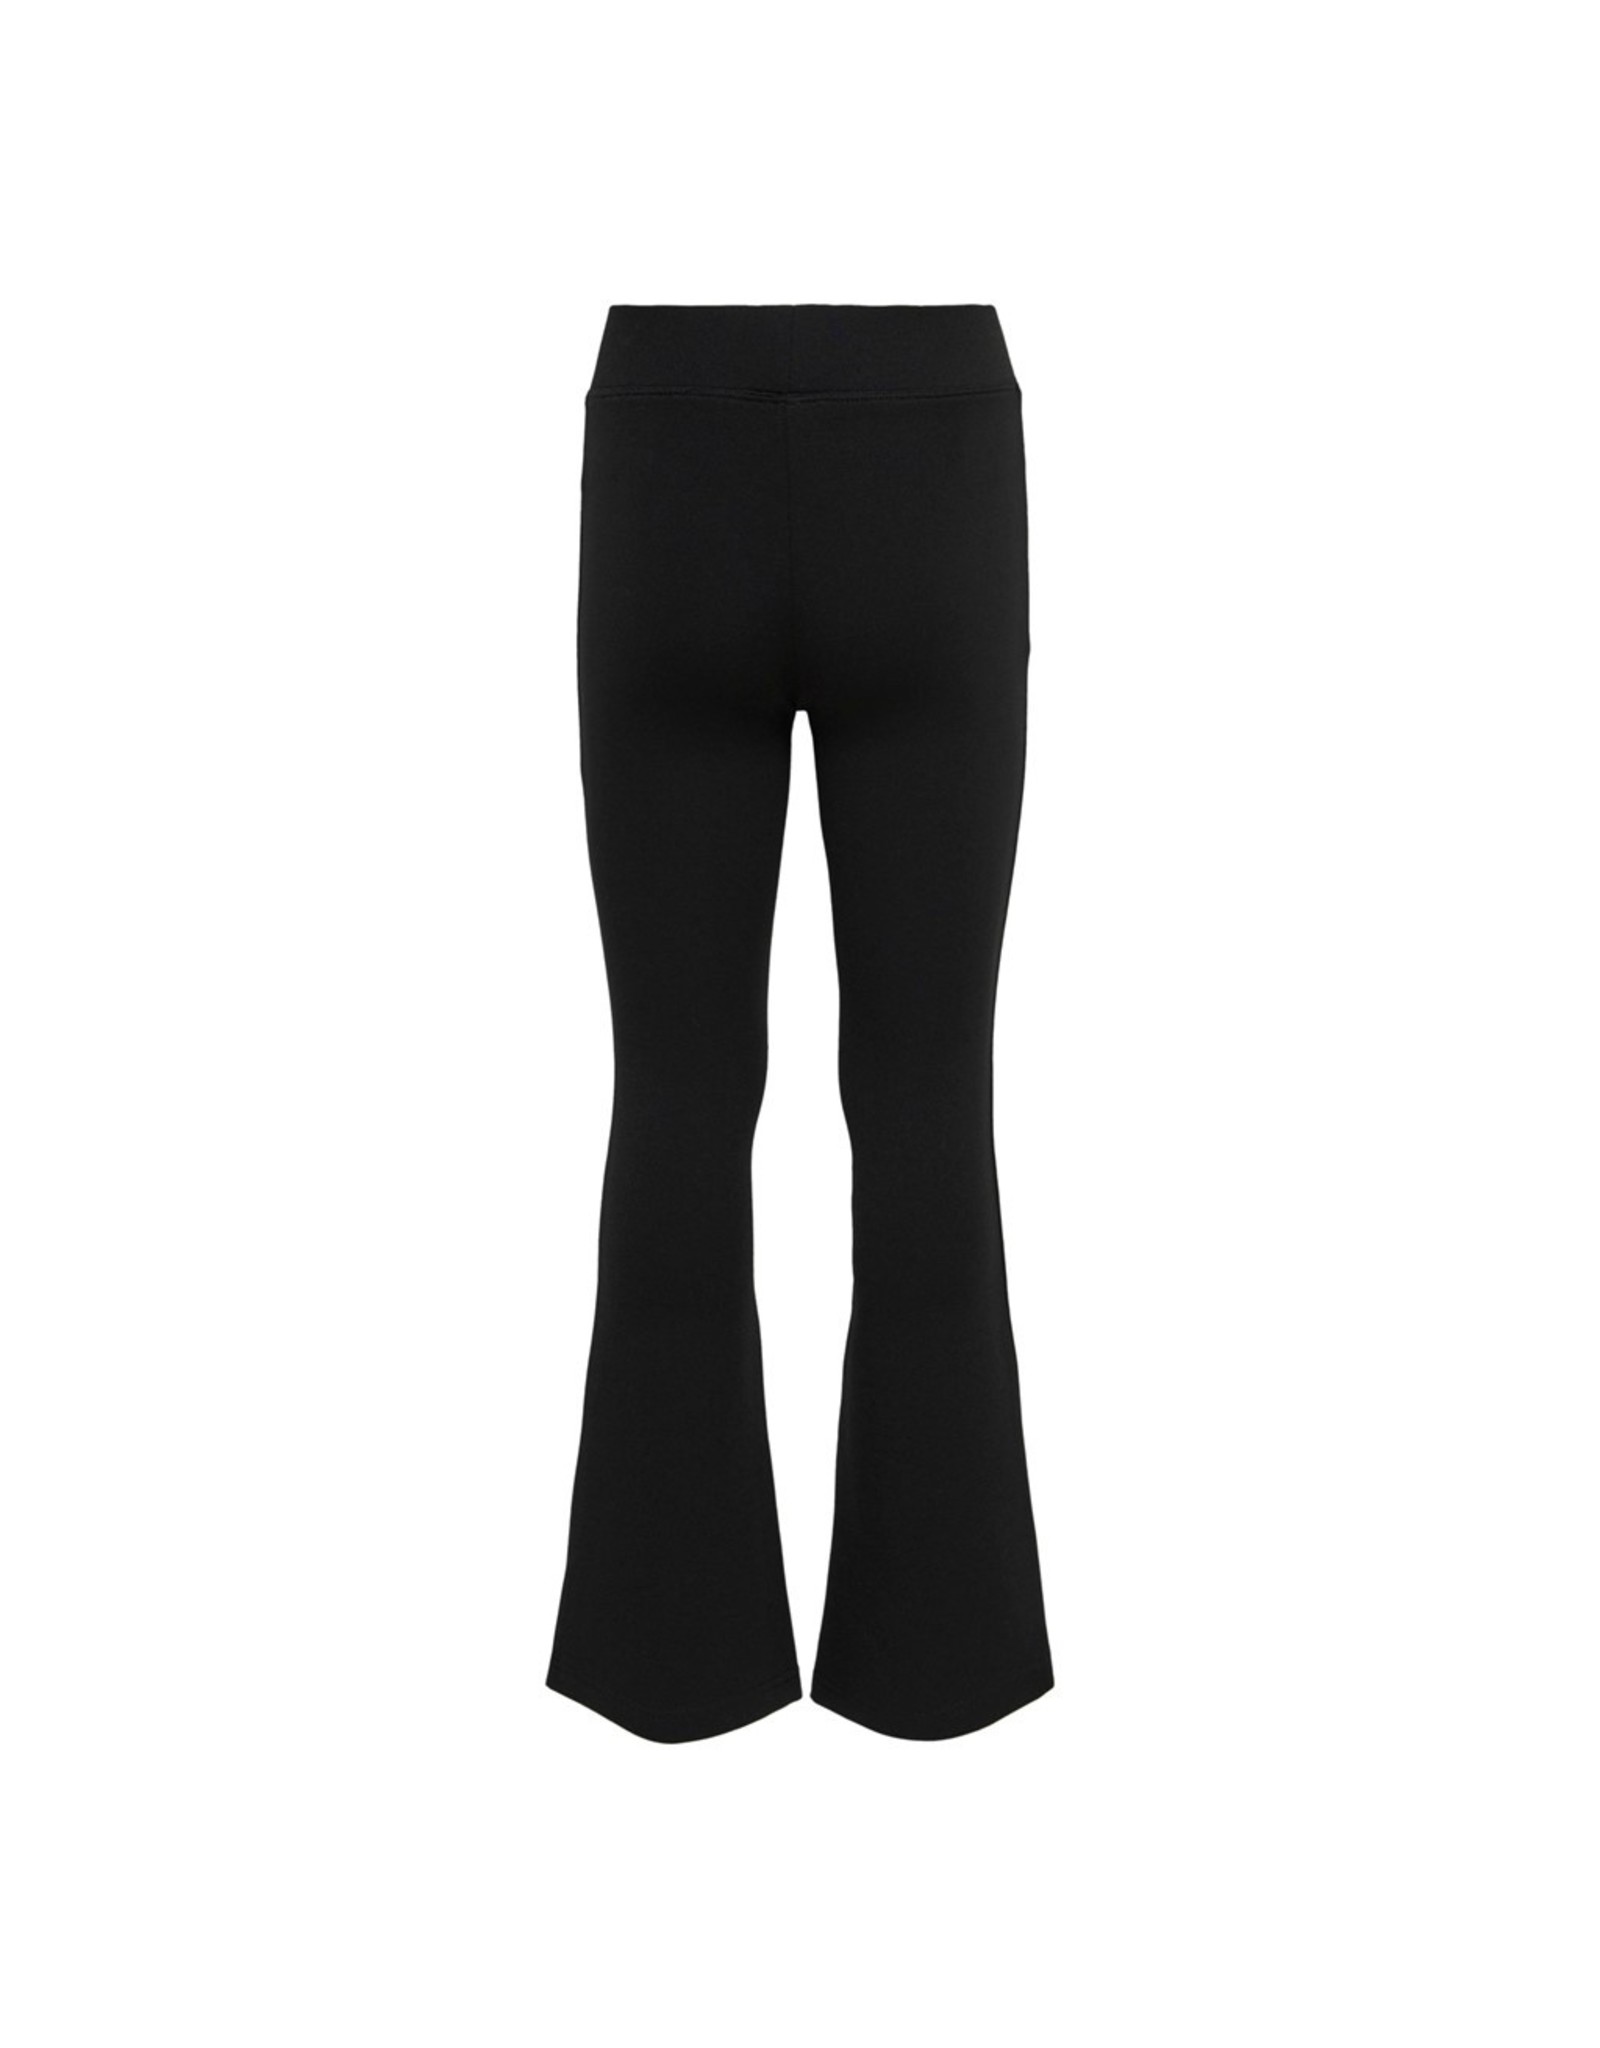 ONLY ONLY flared broek NOOS Paige zwart